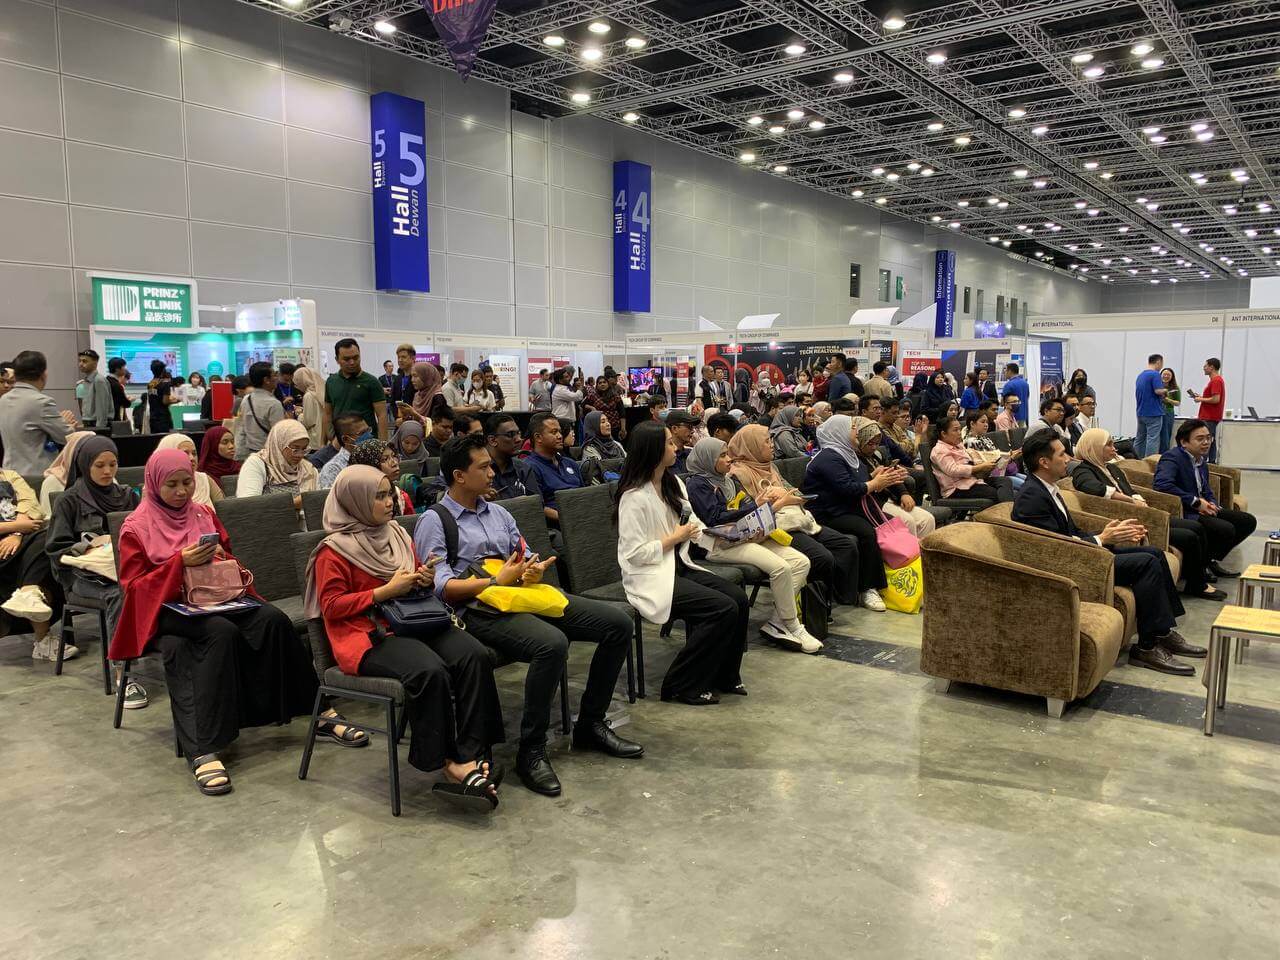 Group of attendees ready for talk @ Jobstore Mycareerfair on 23 & 24 March 2023 @ Kuala Lumpur Convention Centre